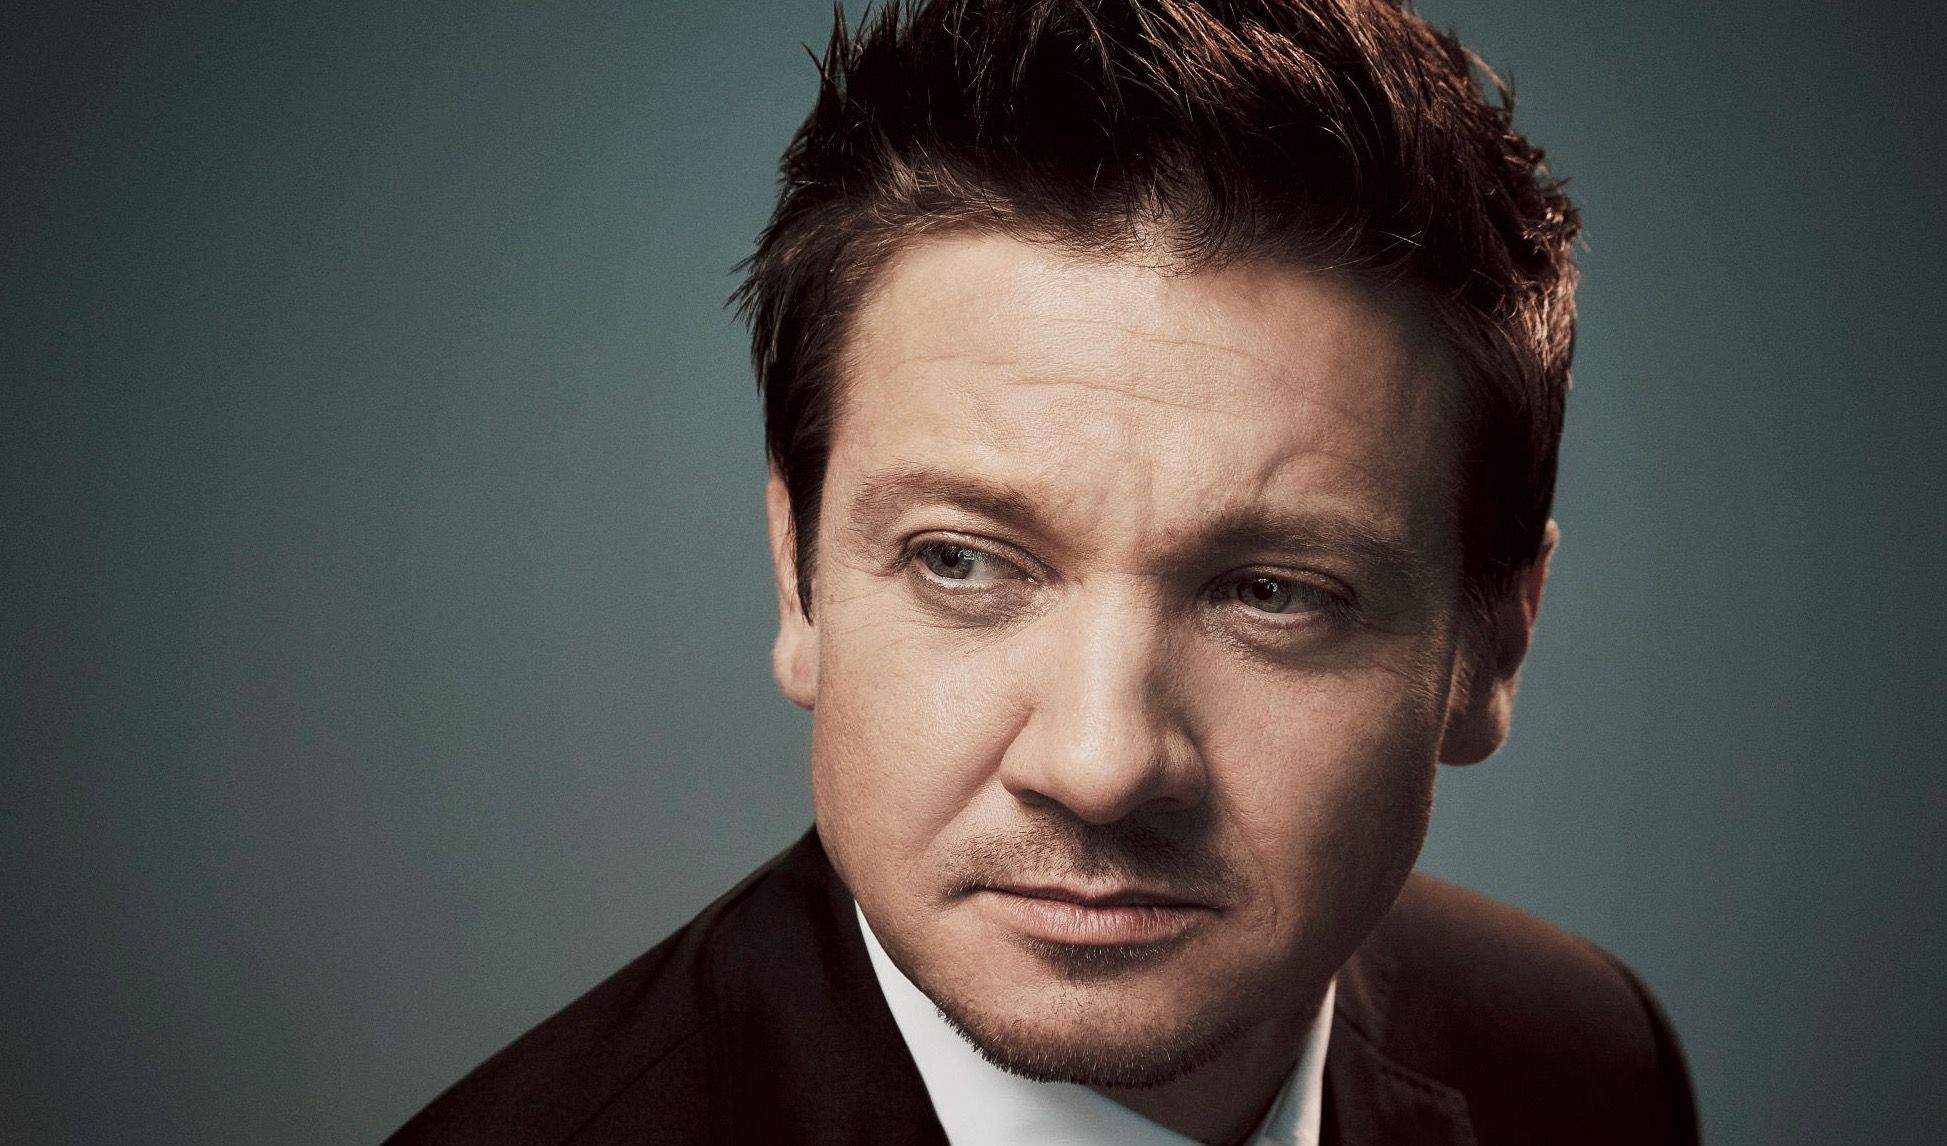 Photo of Jeremy Renner against a gray background.